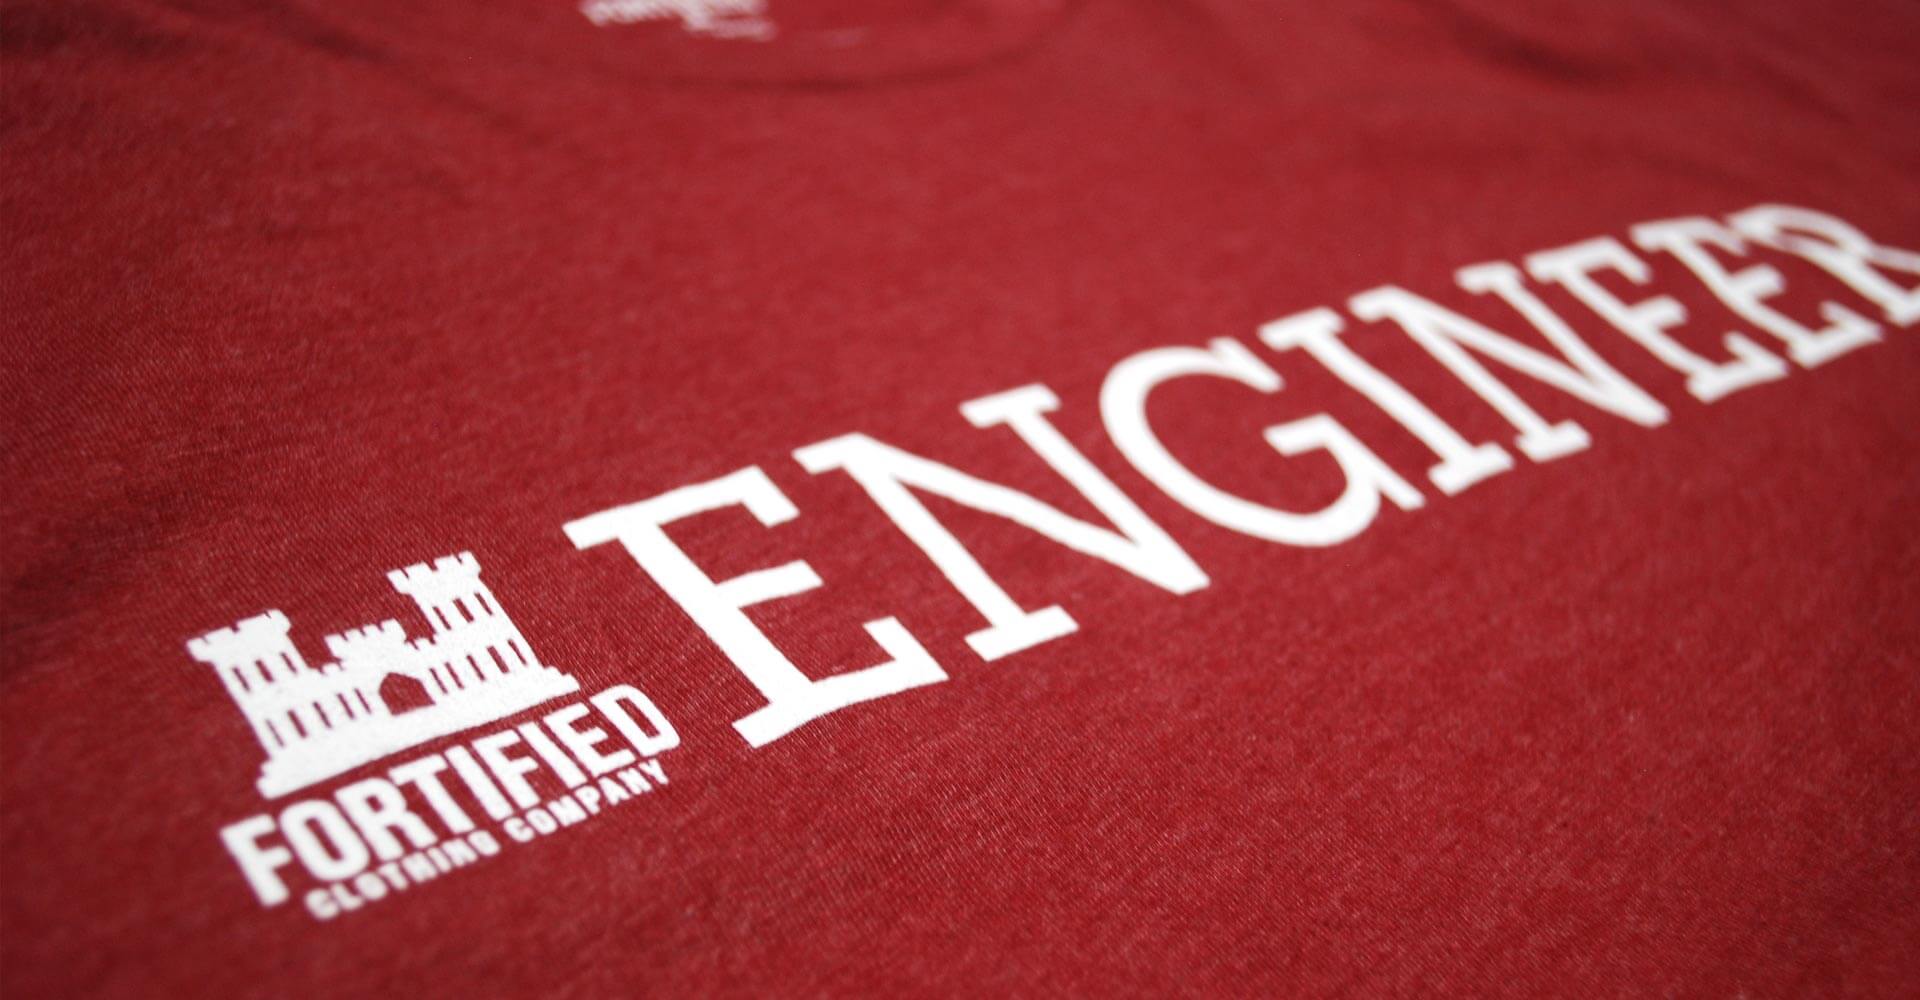 Fortified Clothing Company Brand Engineering Group Tshirt